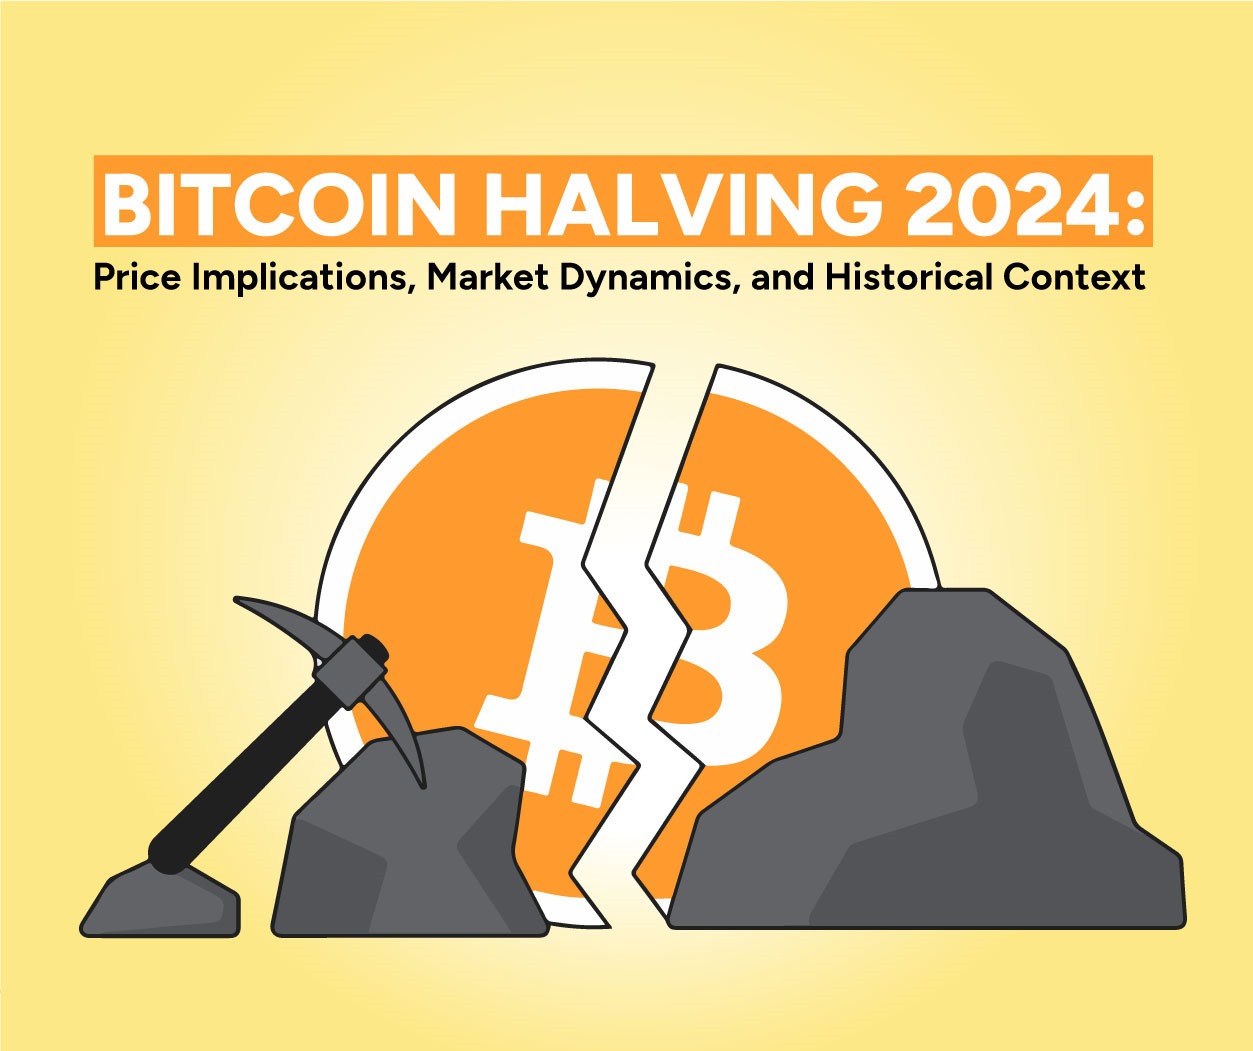 Beyond The Hype: Understanding The Significance Of Bitcoin Halving 2024 - Risk Management Techniques For Trading Bitcoin Around The Halving Event